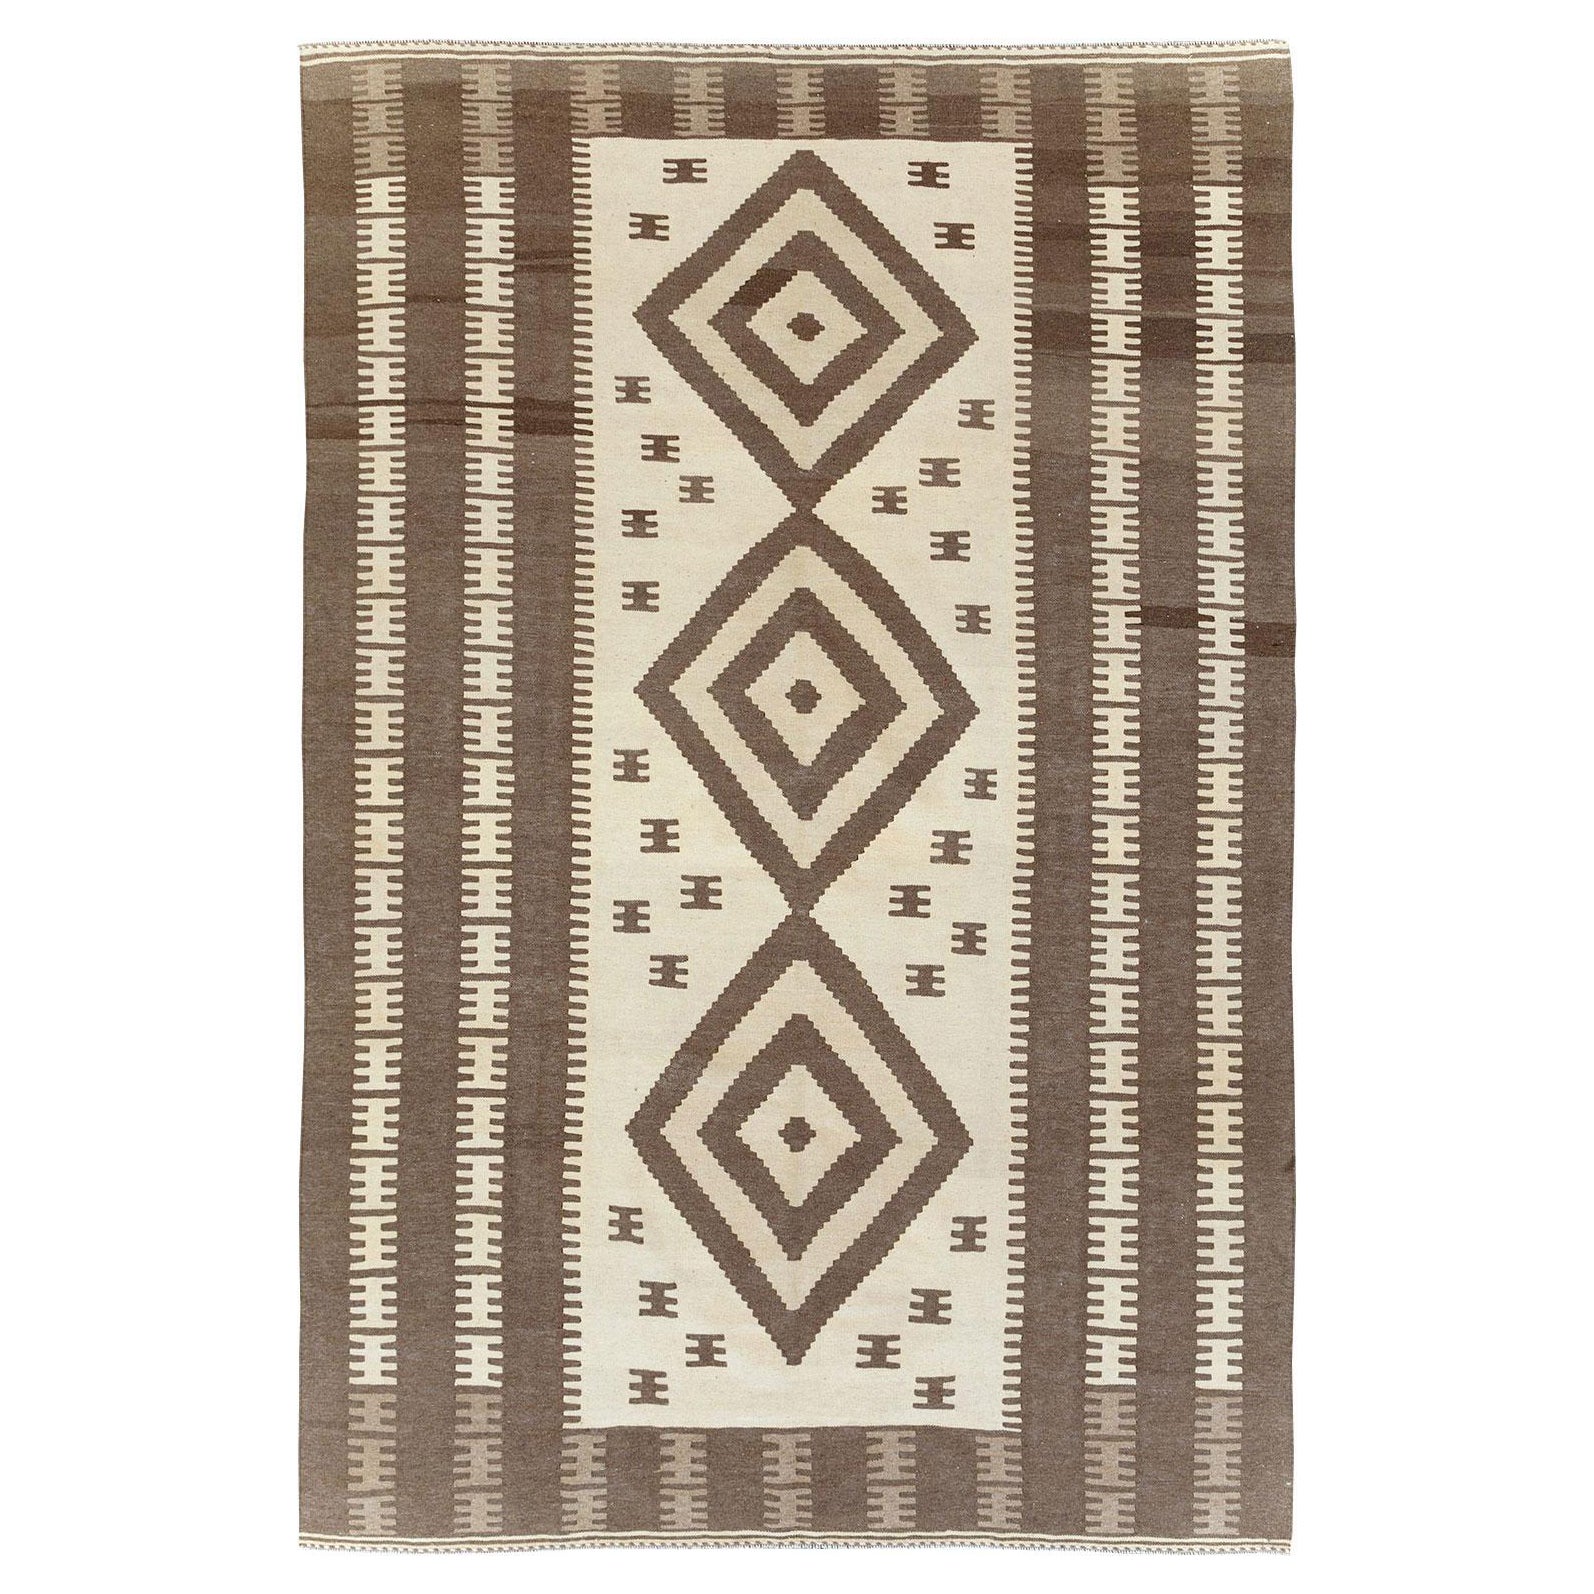 Contemporary Tribal Style Persian Flatweave Kilim Small Room Size Carpet For Sale